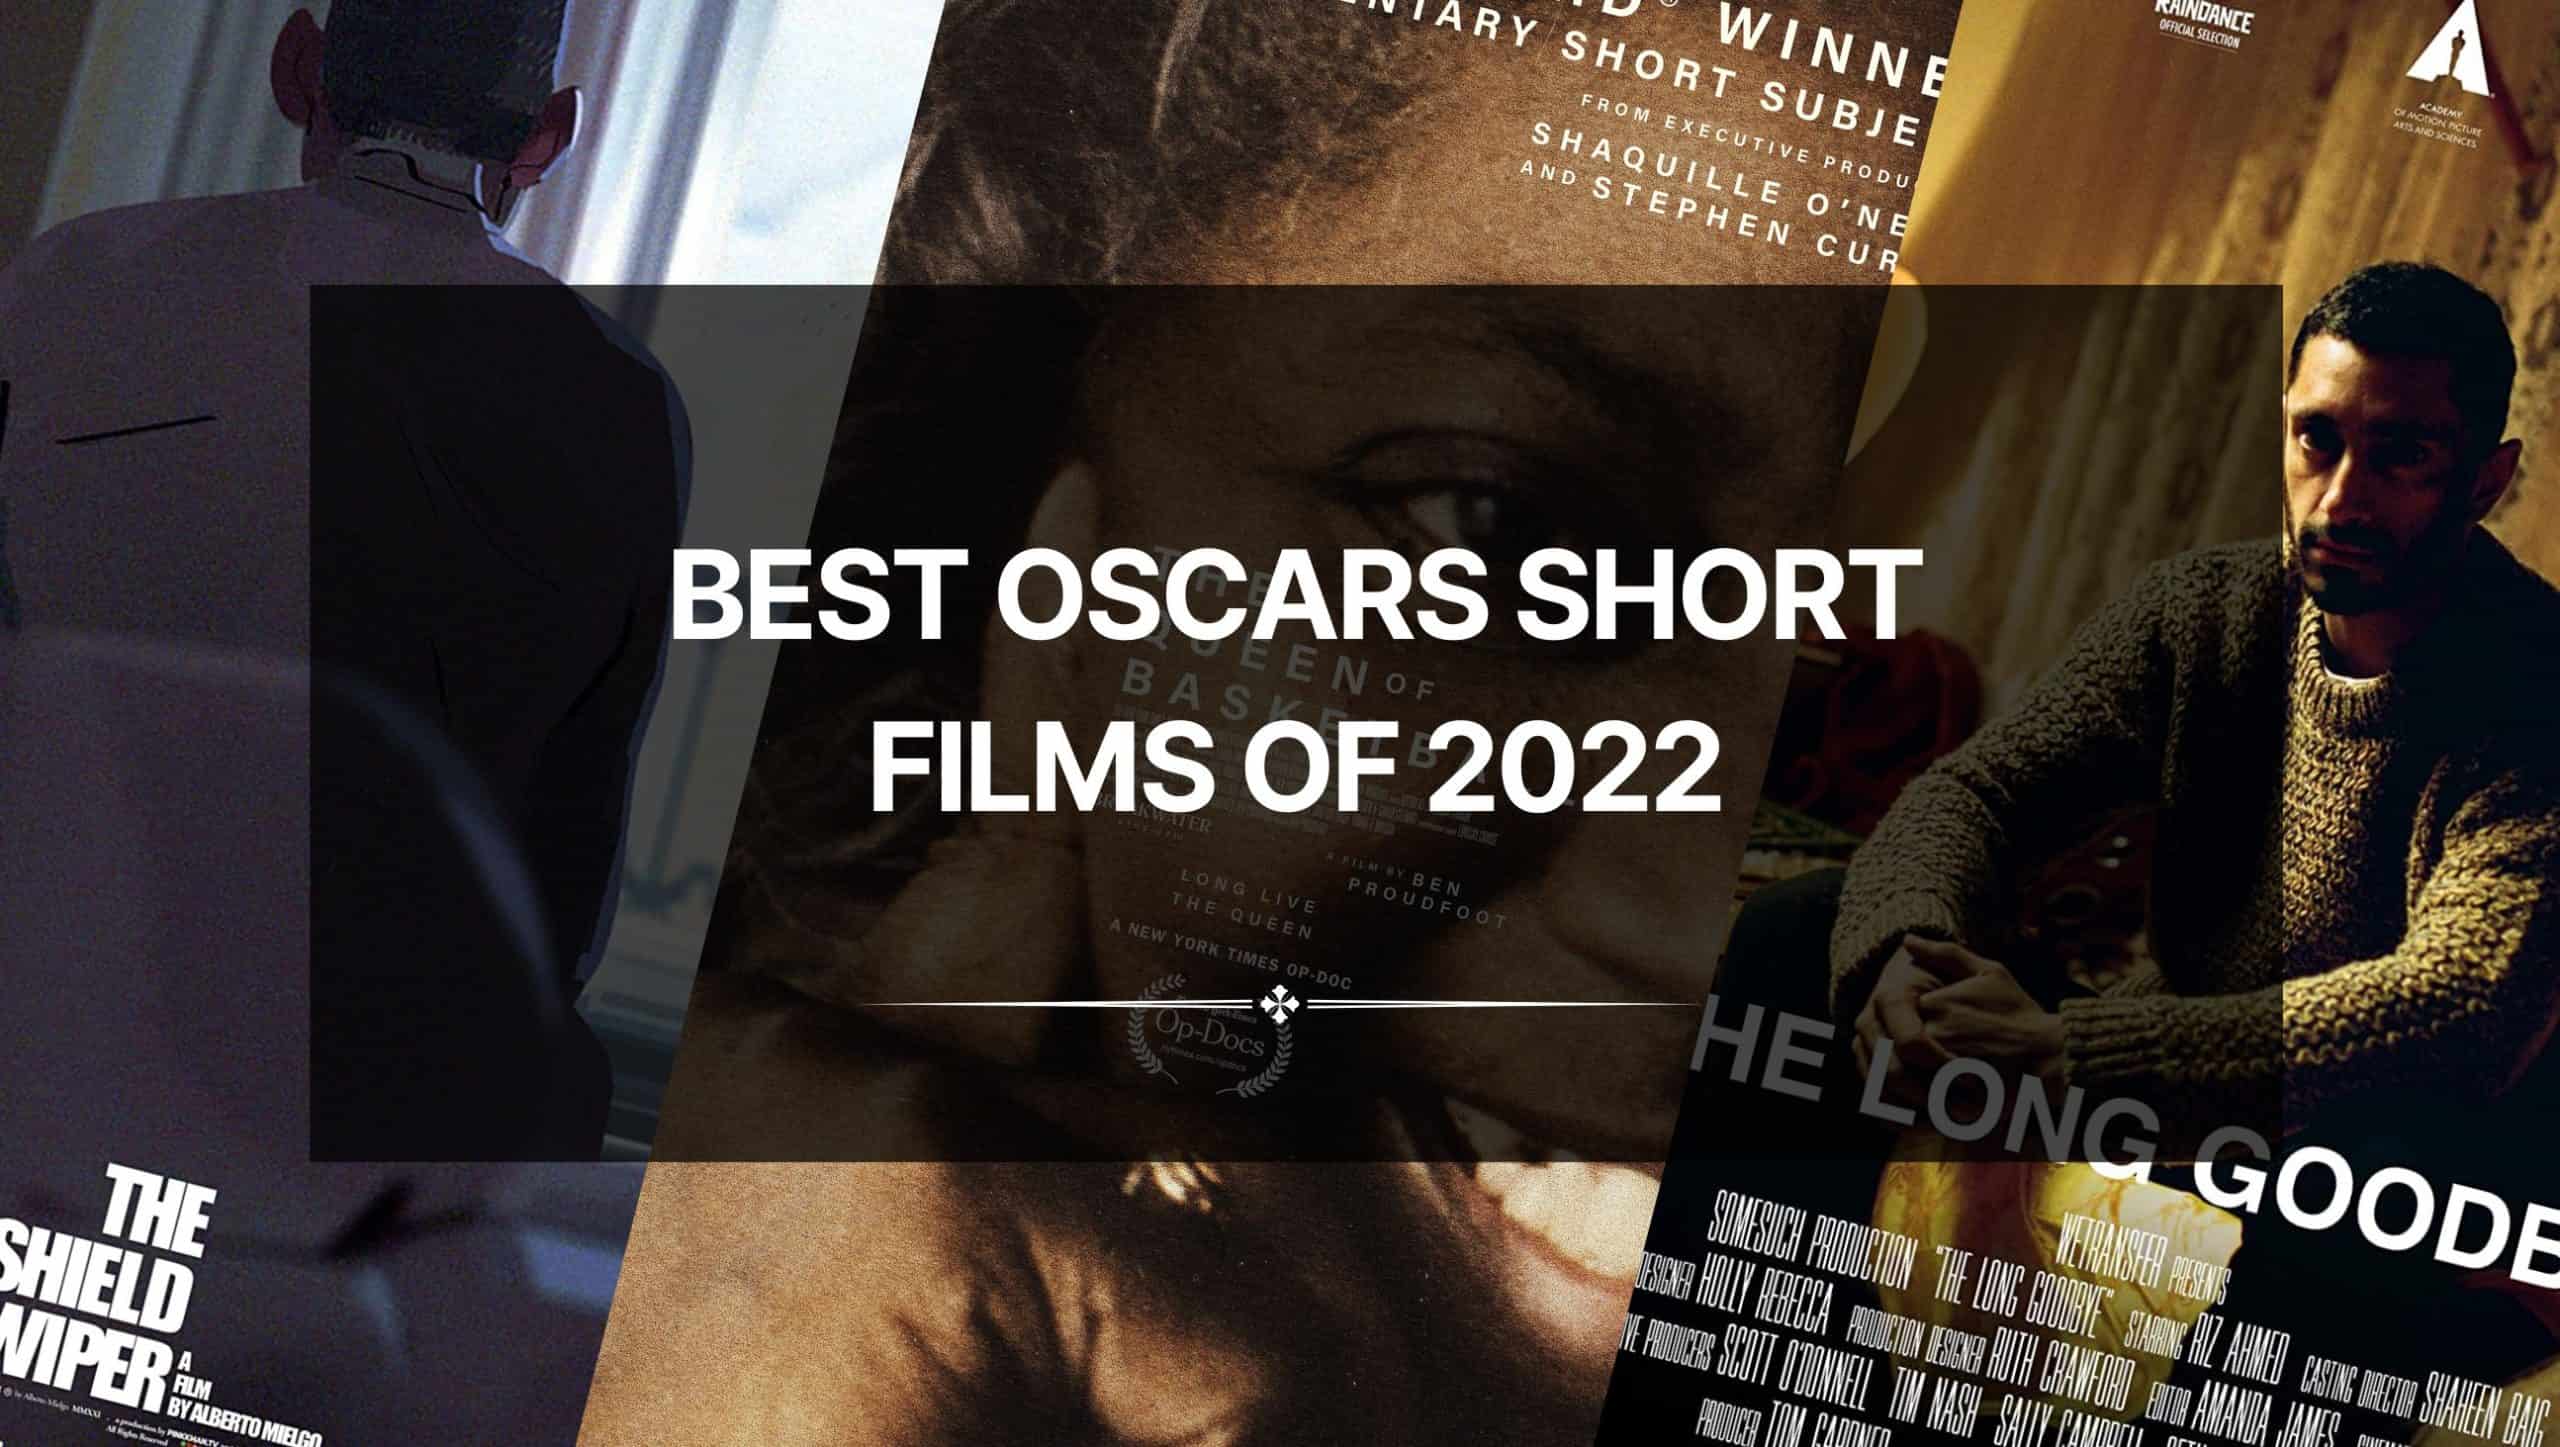 Best Oscars Short Films of 2022 – The Outstanding Nominees